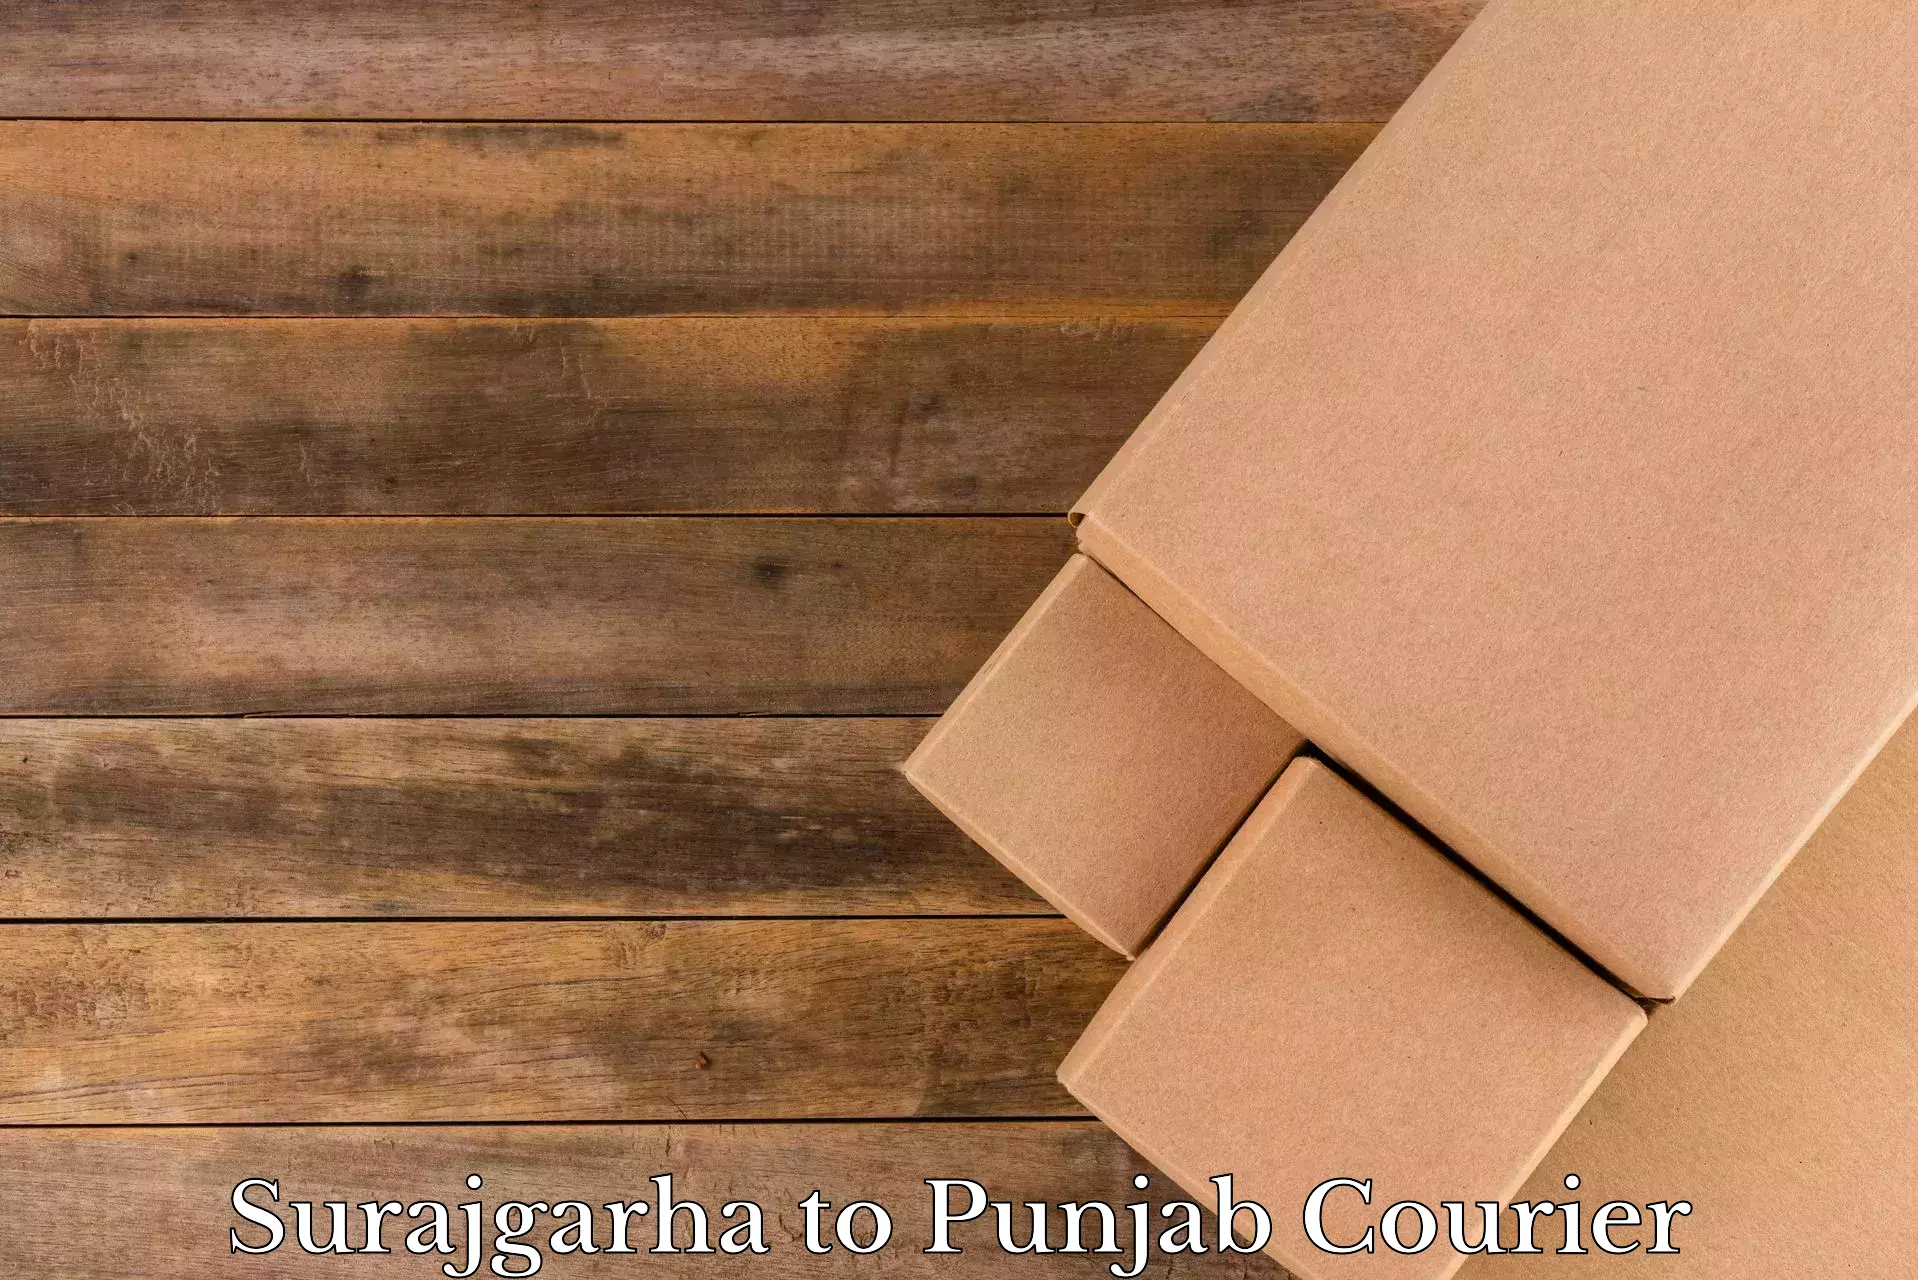 Dependable moving services in Surajgarha to Punjab